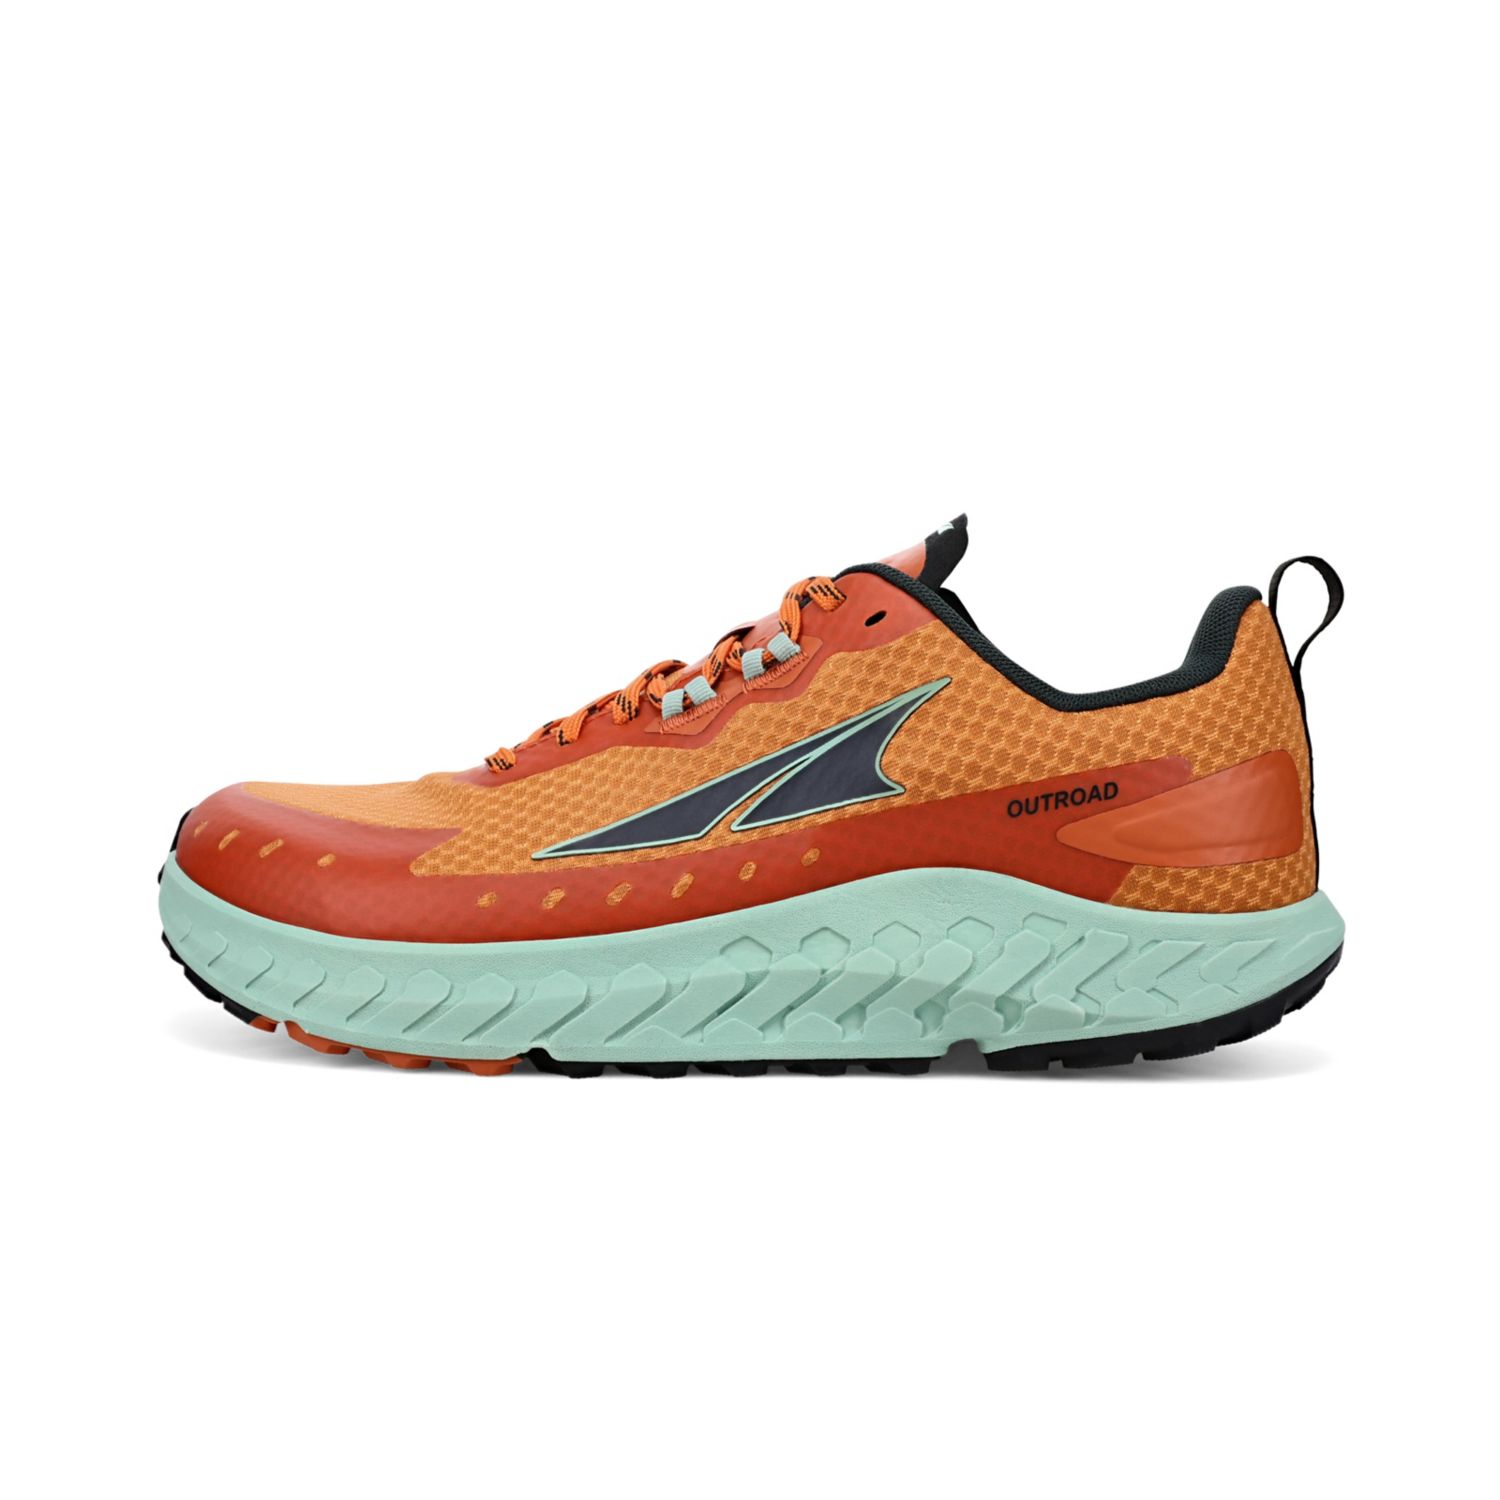 Green / Orange Altra Outroad Men's Road Running Shoes | Ireland-38160279